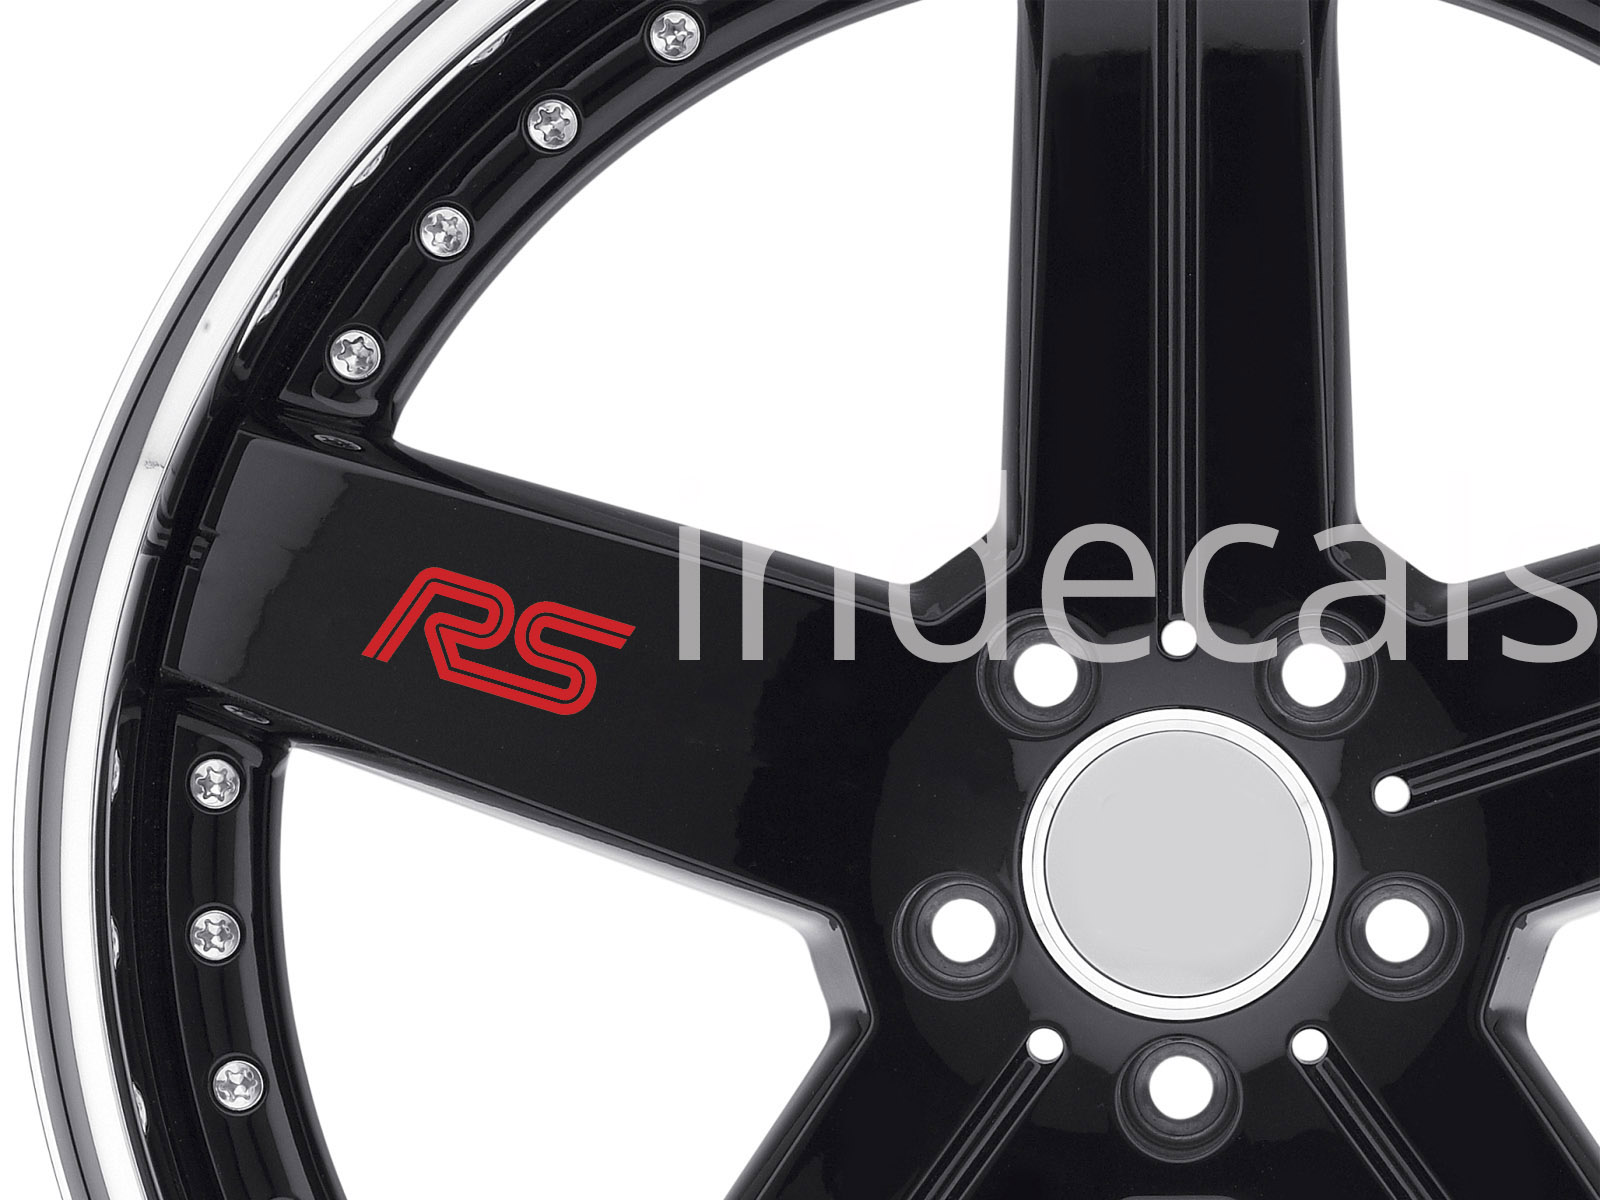 6 x Ford RS Stickers for Wheels - Red